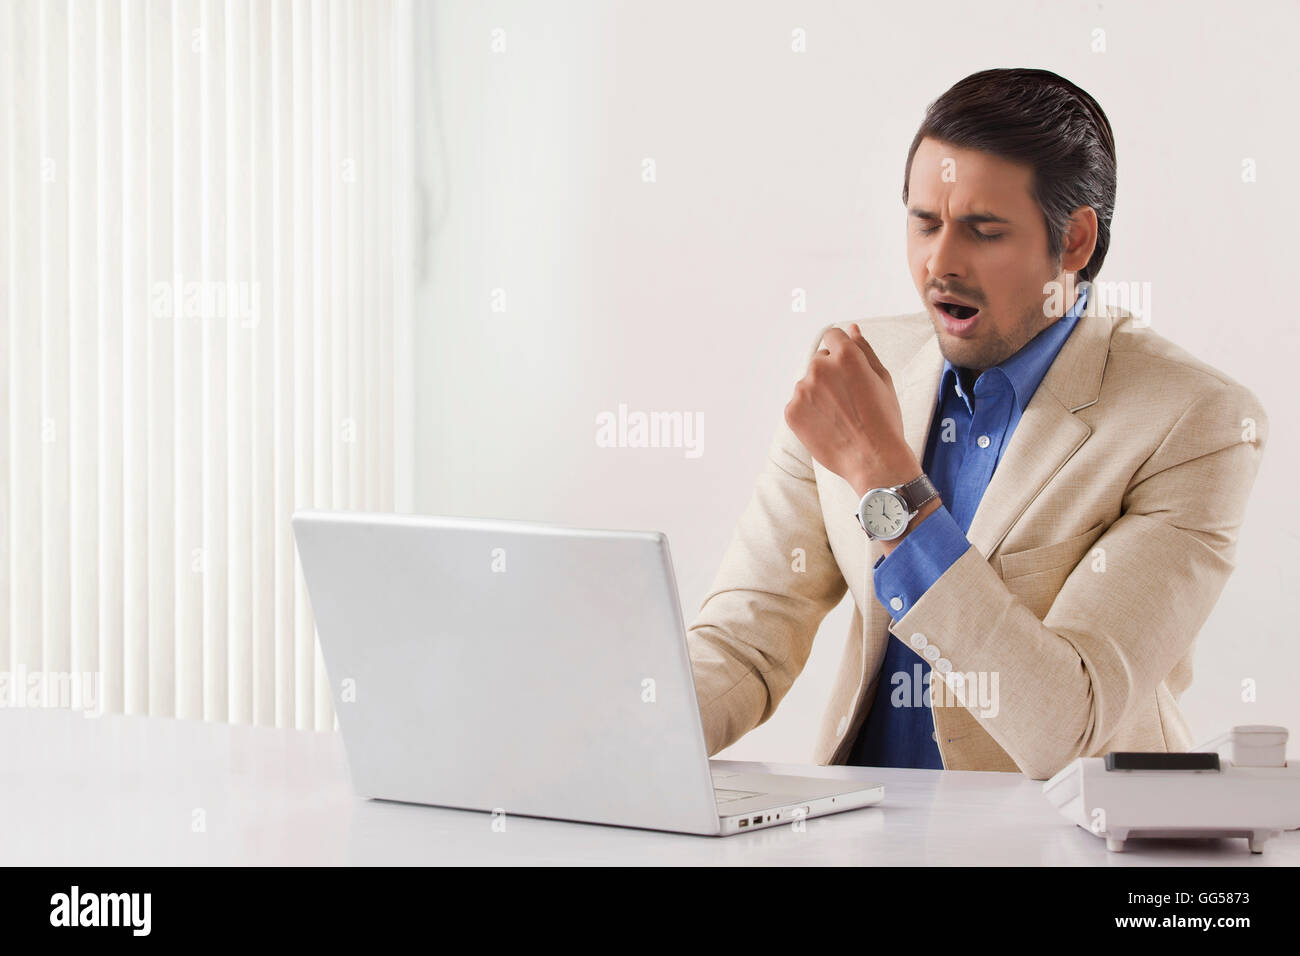 Exhaustion young businessman using laptop at office desk Stock Photo